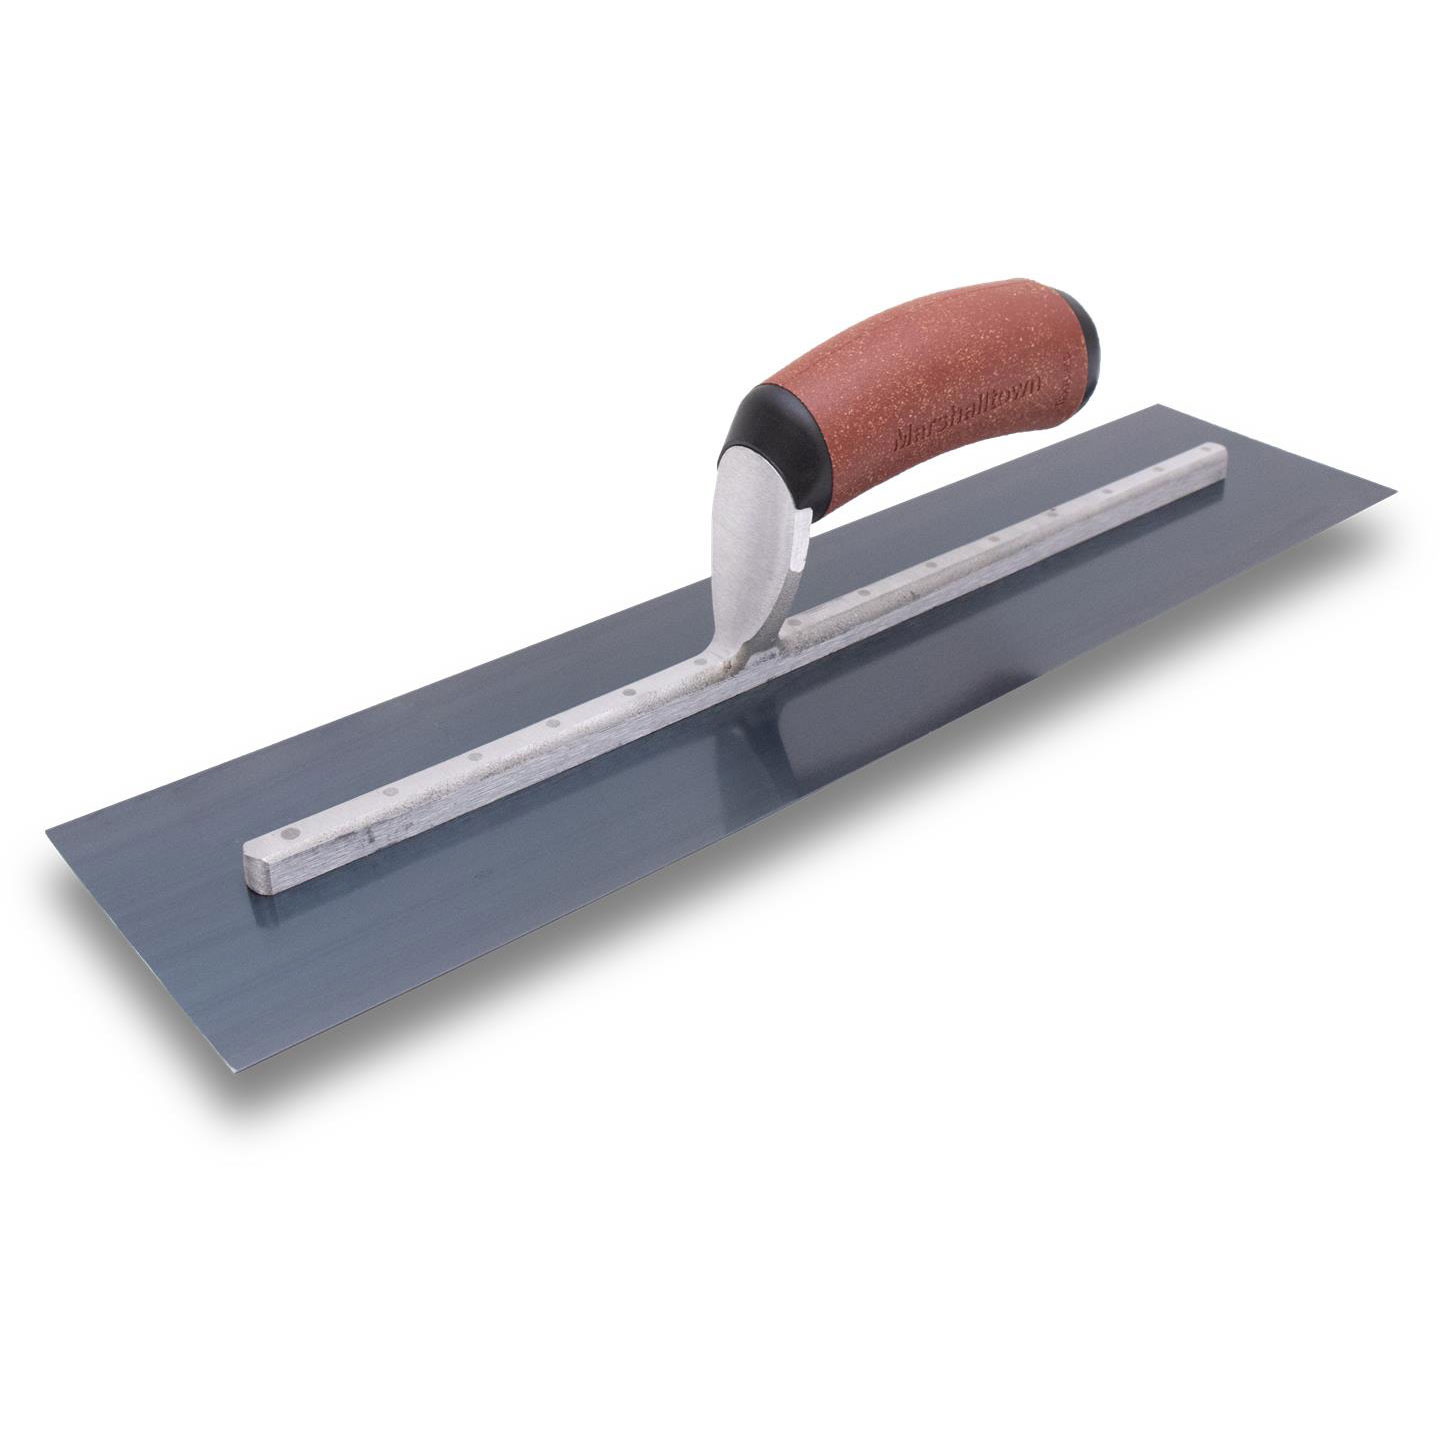 Marshalltown MXS20BDC 20in x 4in Blue Steel Finishing Trowel with DuraCork Handle MXS20BDC